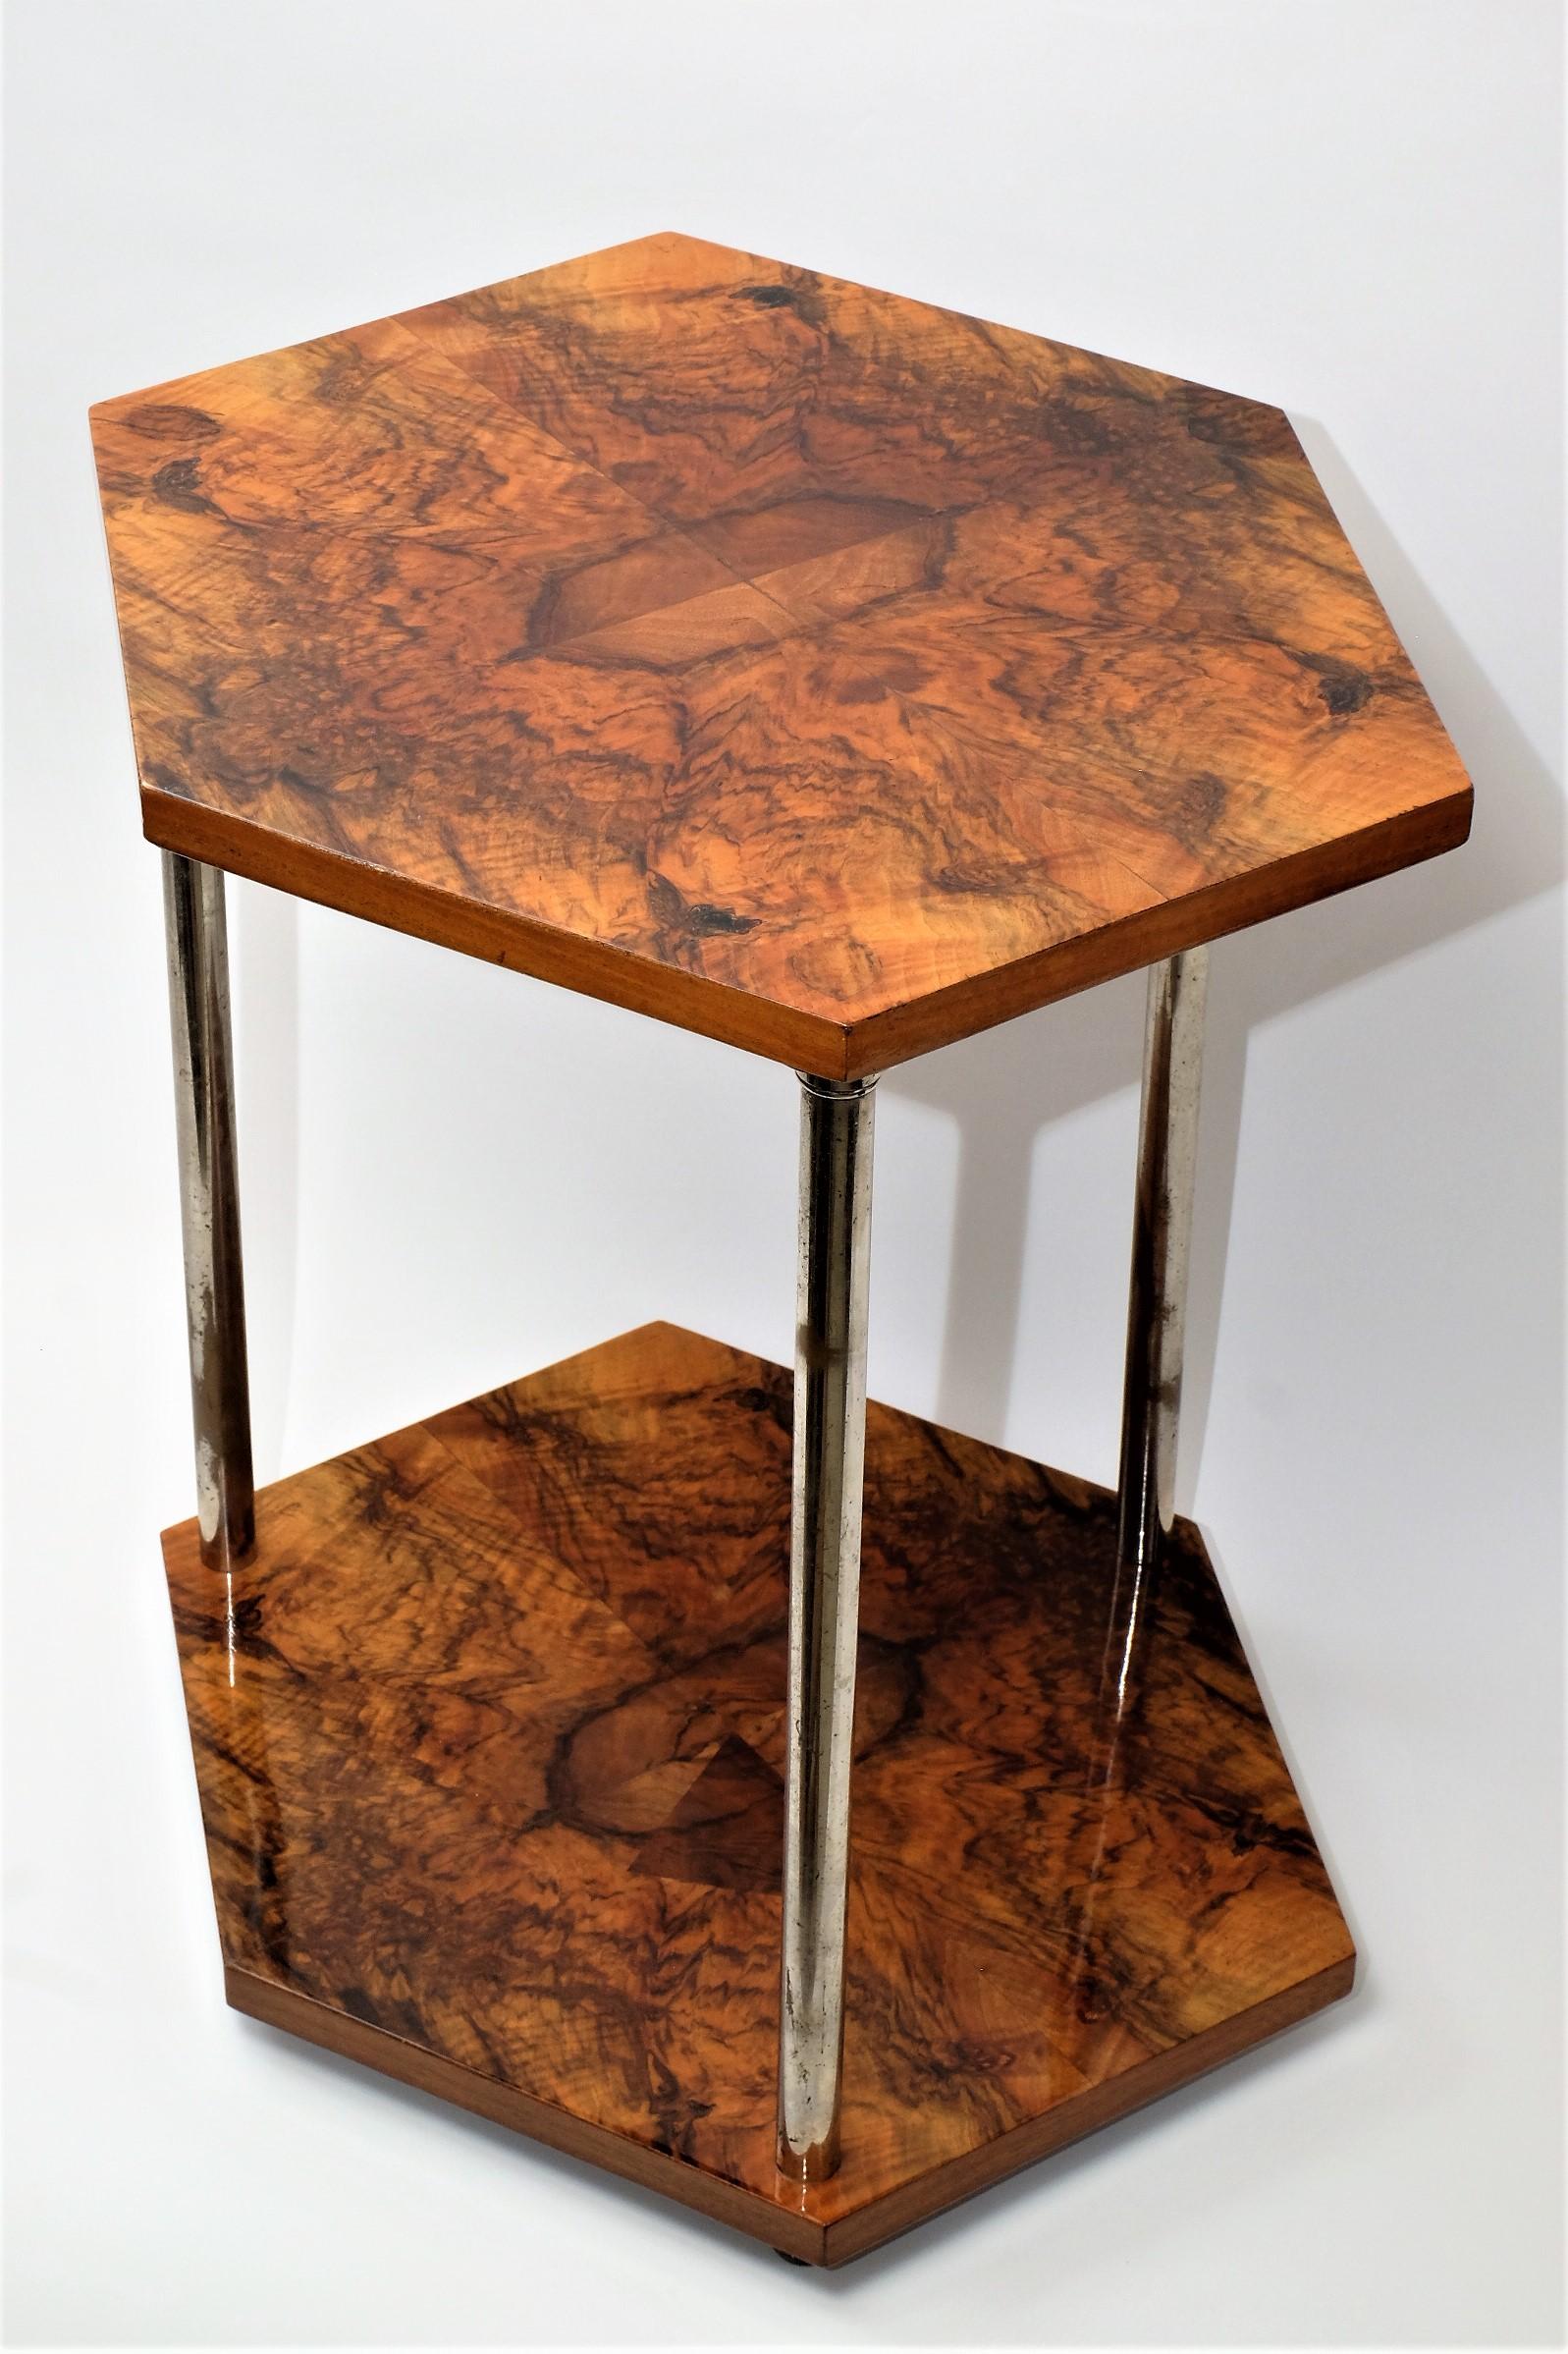 Rare Art Deco side table with two hexagonal walnut boards and three chromed iron legs. The table stands on three black ball feet.

This piece is in a good vintage condition with traces of wear. The chrome plating of the legs has come loose in some